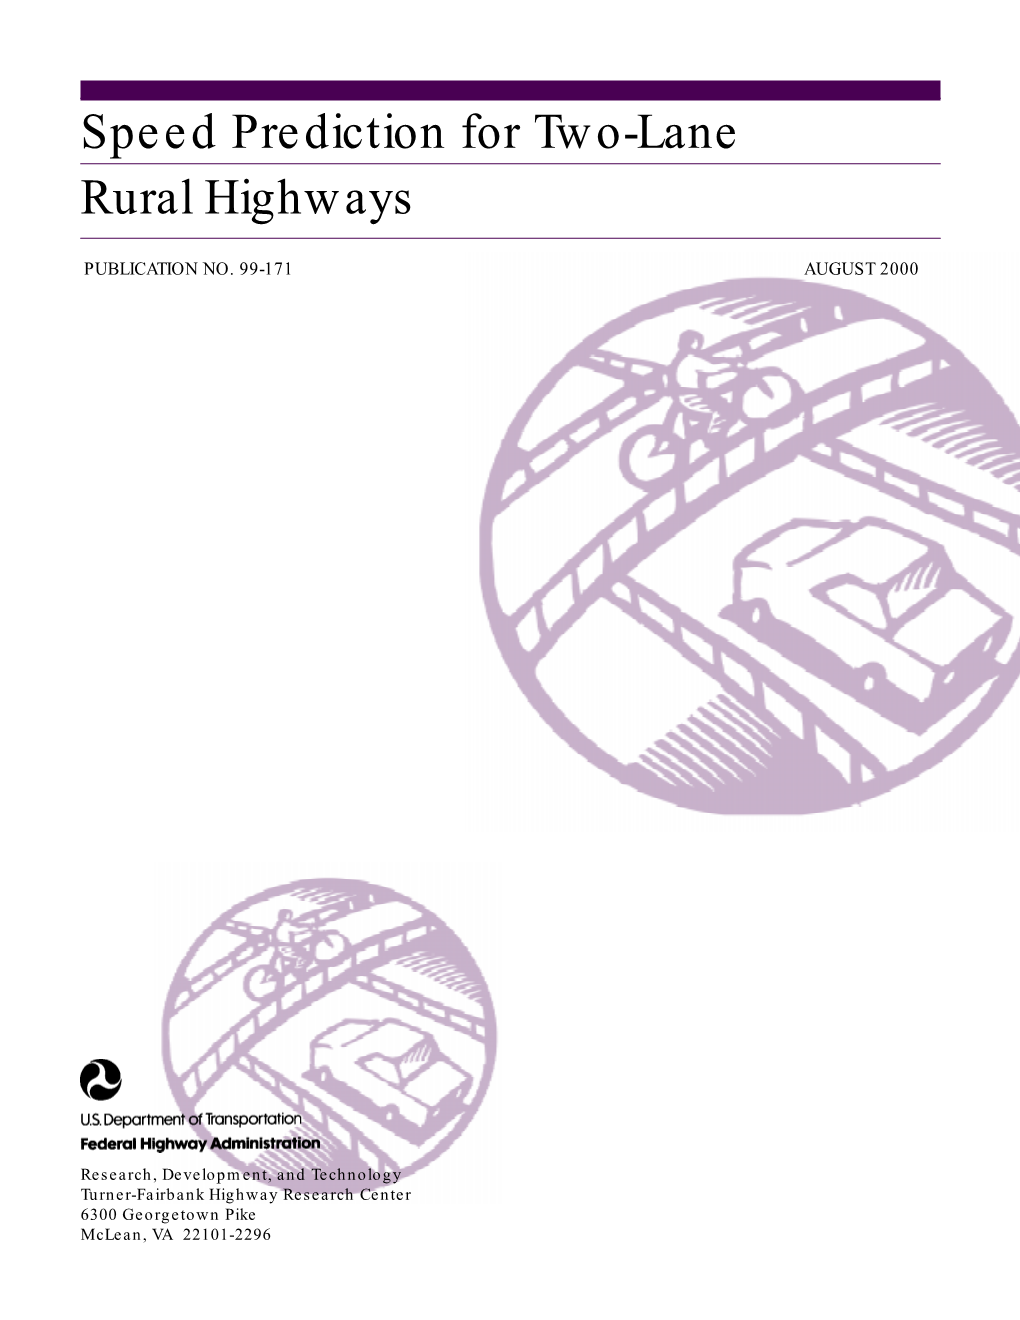 Speed Prediction for Two-Lane Rural Highways